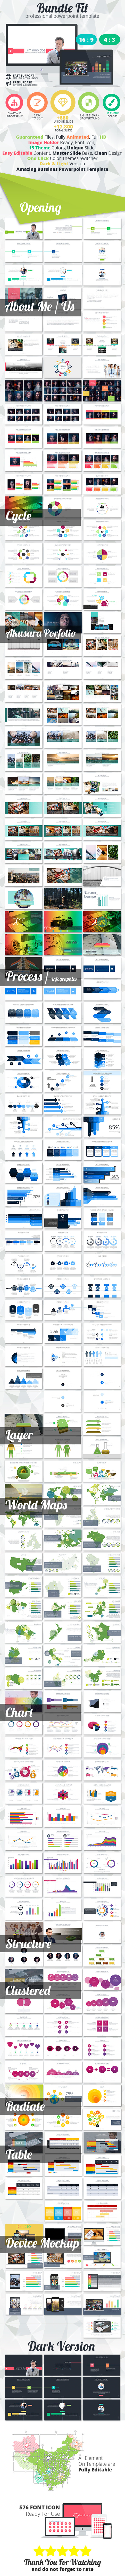 FIT - Multipurpose Powerpoint Template